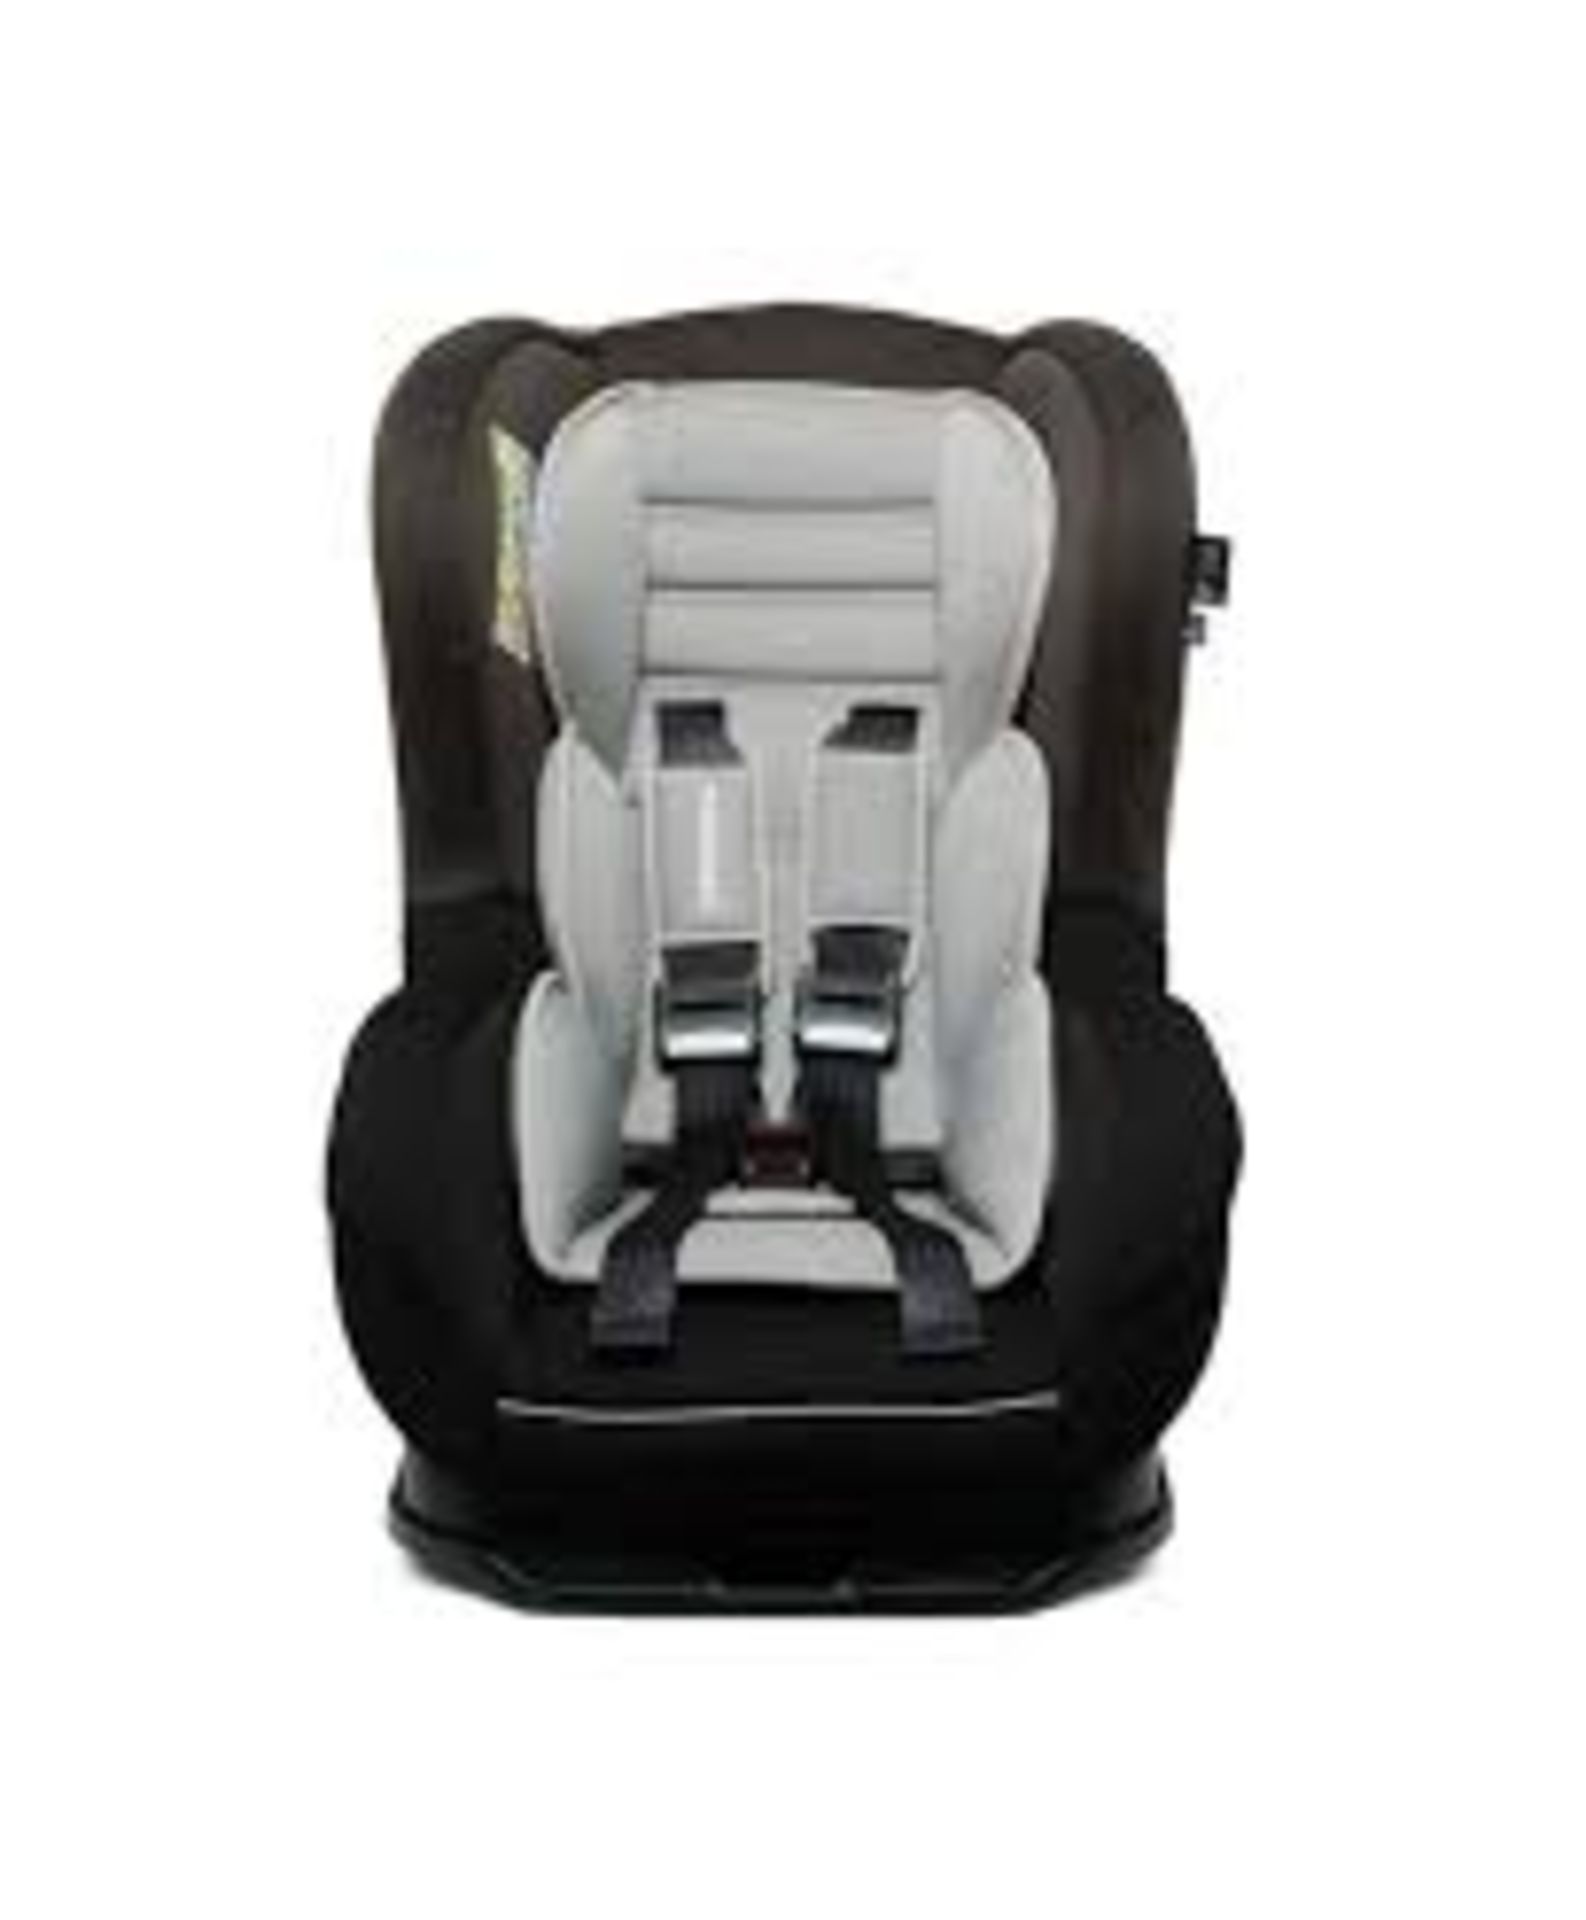 BRAND NEW MOTHERCARE MADRID BLACK AND GREY CAR SEAT R17C